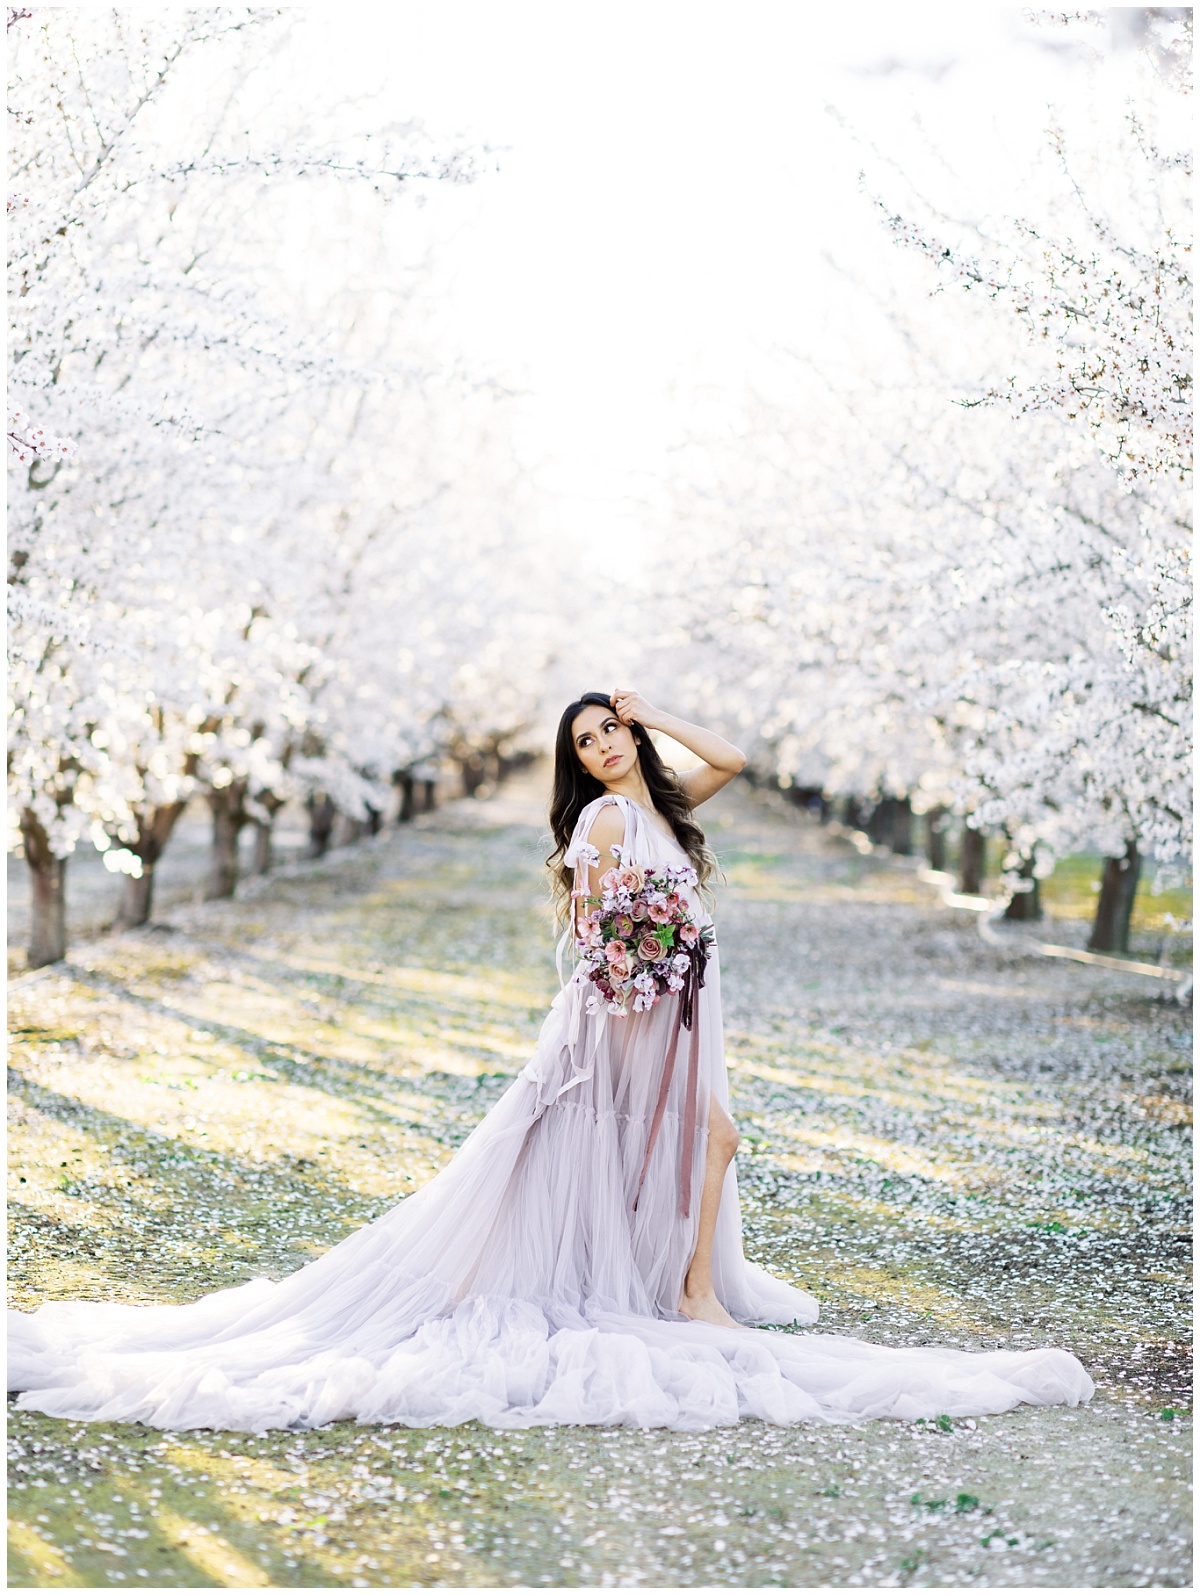 Ethereal Almond Blossom Photos